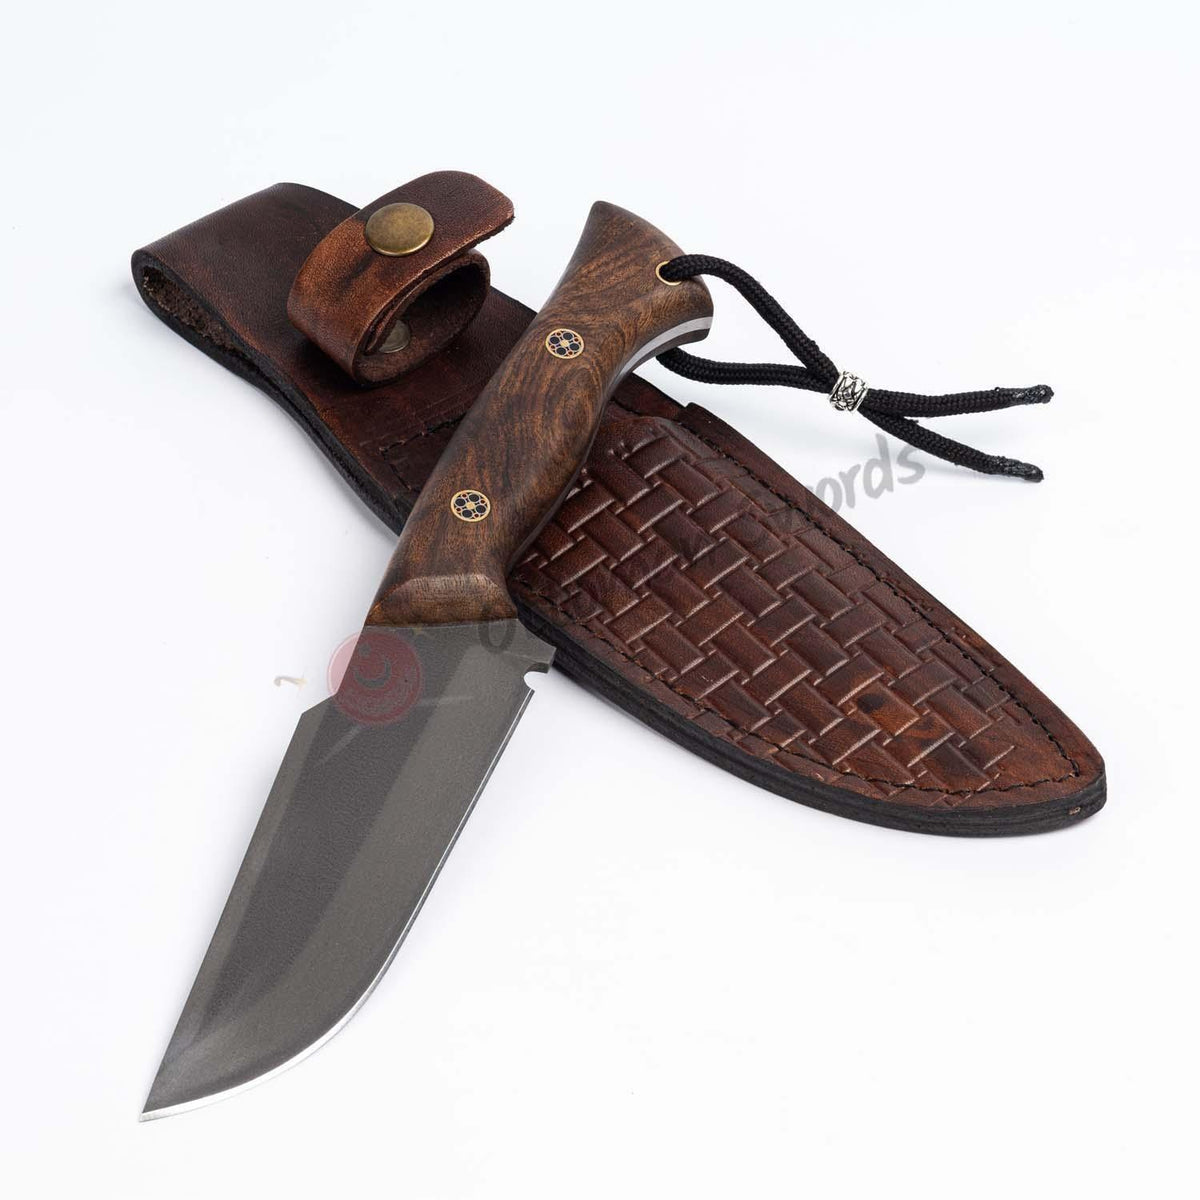 D2 Steel Full Tang Fixed Blade Survival Knife Walnut Handle (3)